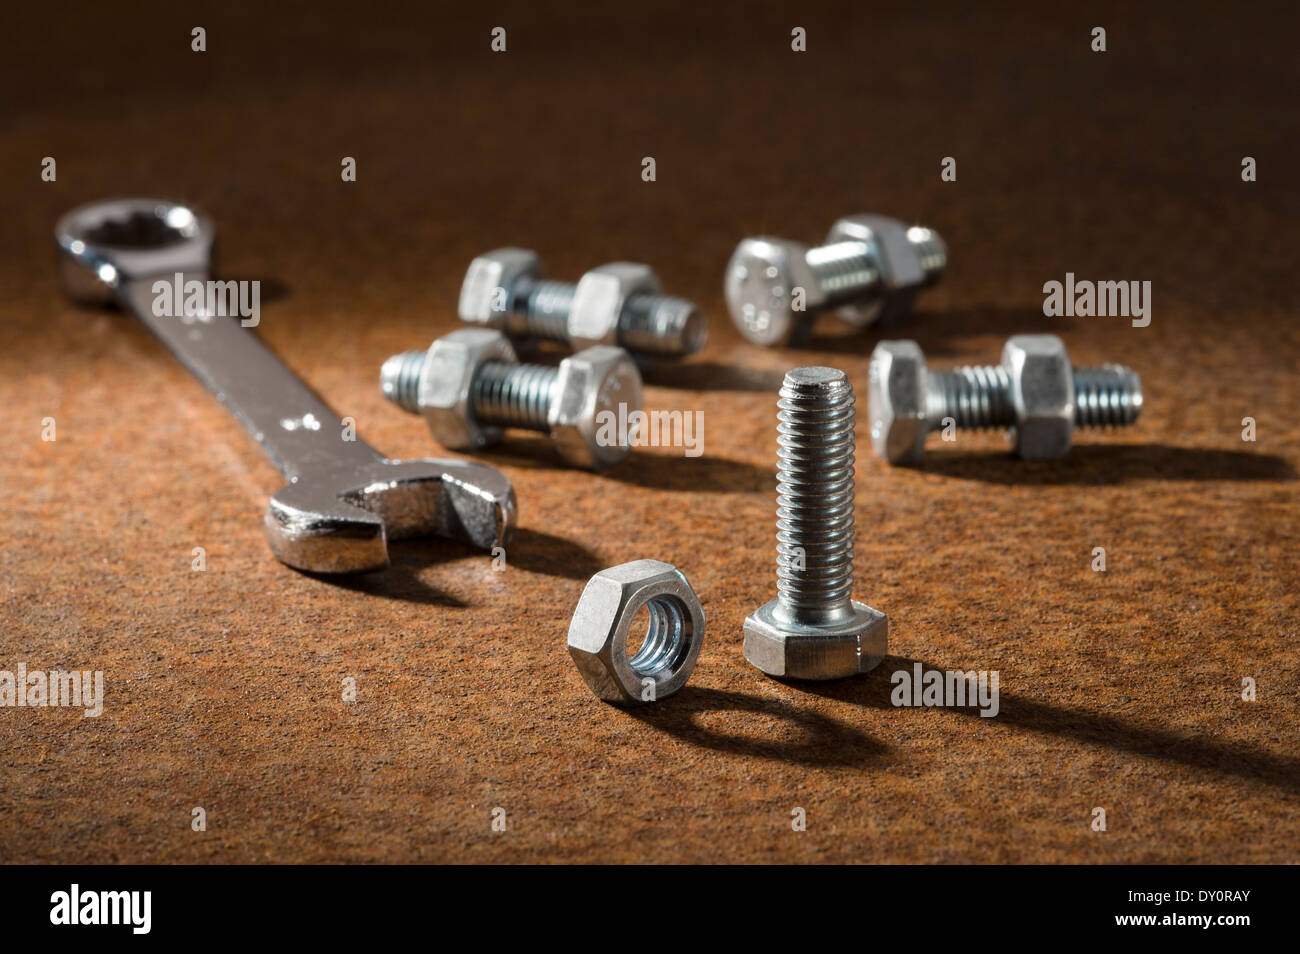 Nuts, bolts and spanner. Stock Photo